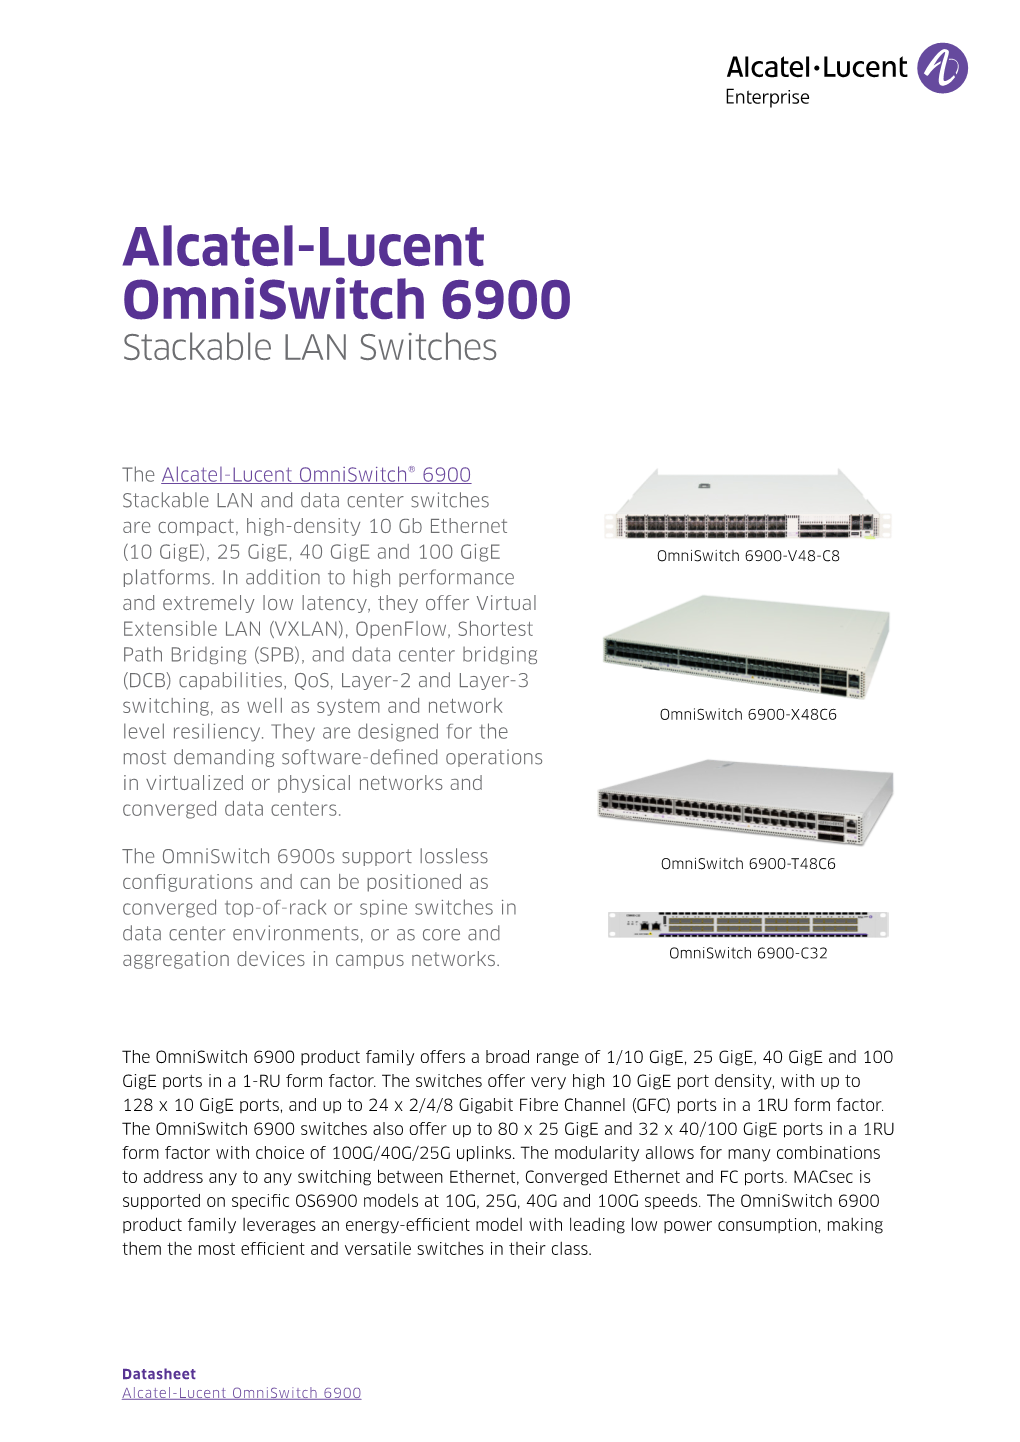 Alcatel-Lucent Omniswitch 6900 Stackable LAN Switches